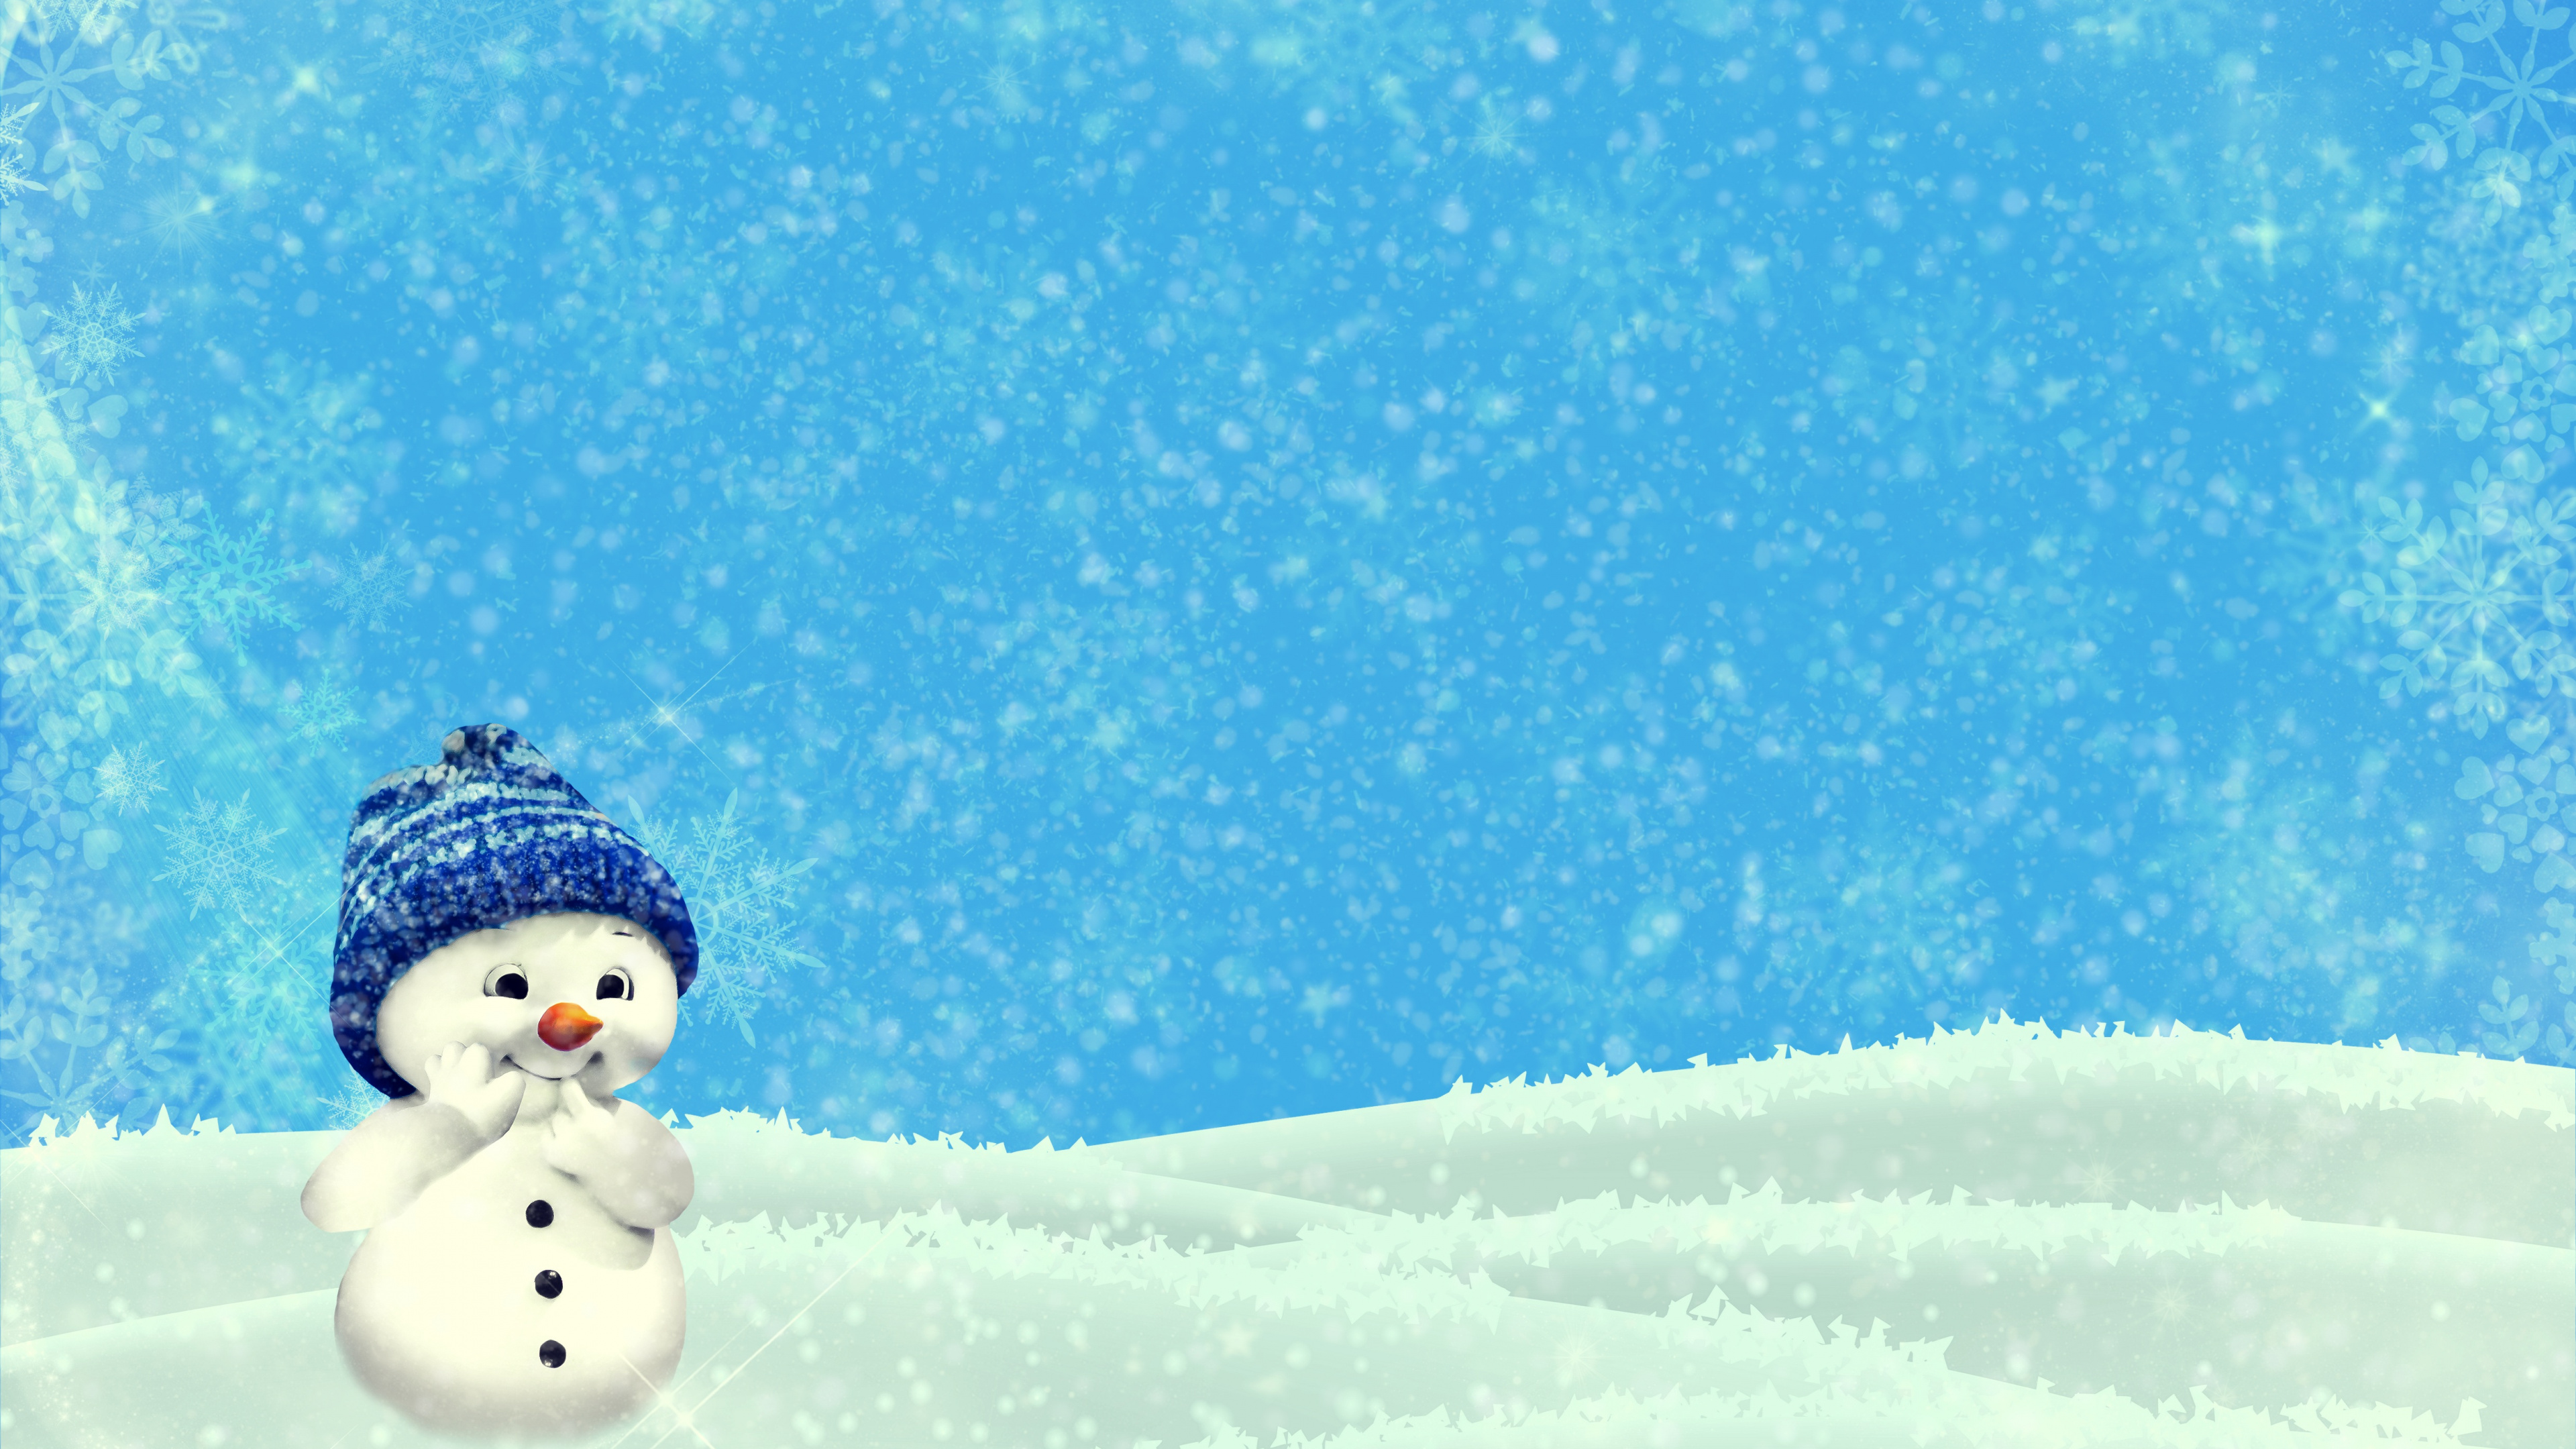 Snowman, Christmas Day, Snow, Winter, Freezing. Wallpaper in 3840x2160 Resolution